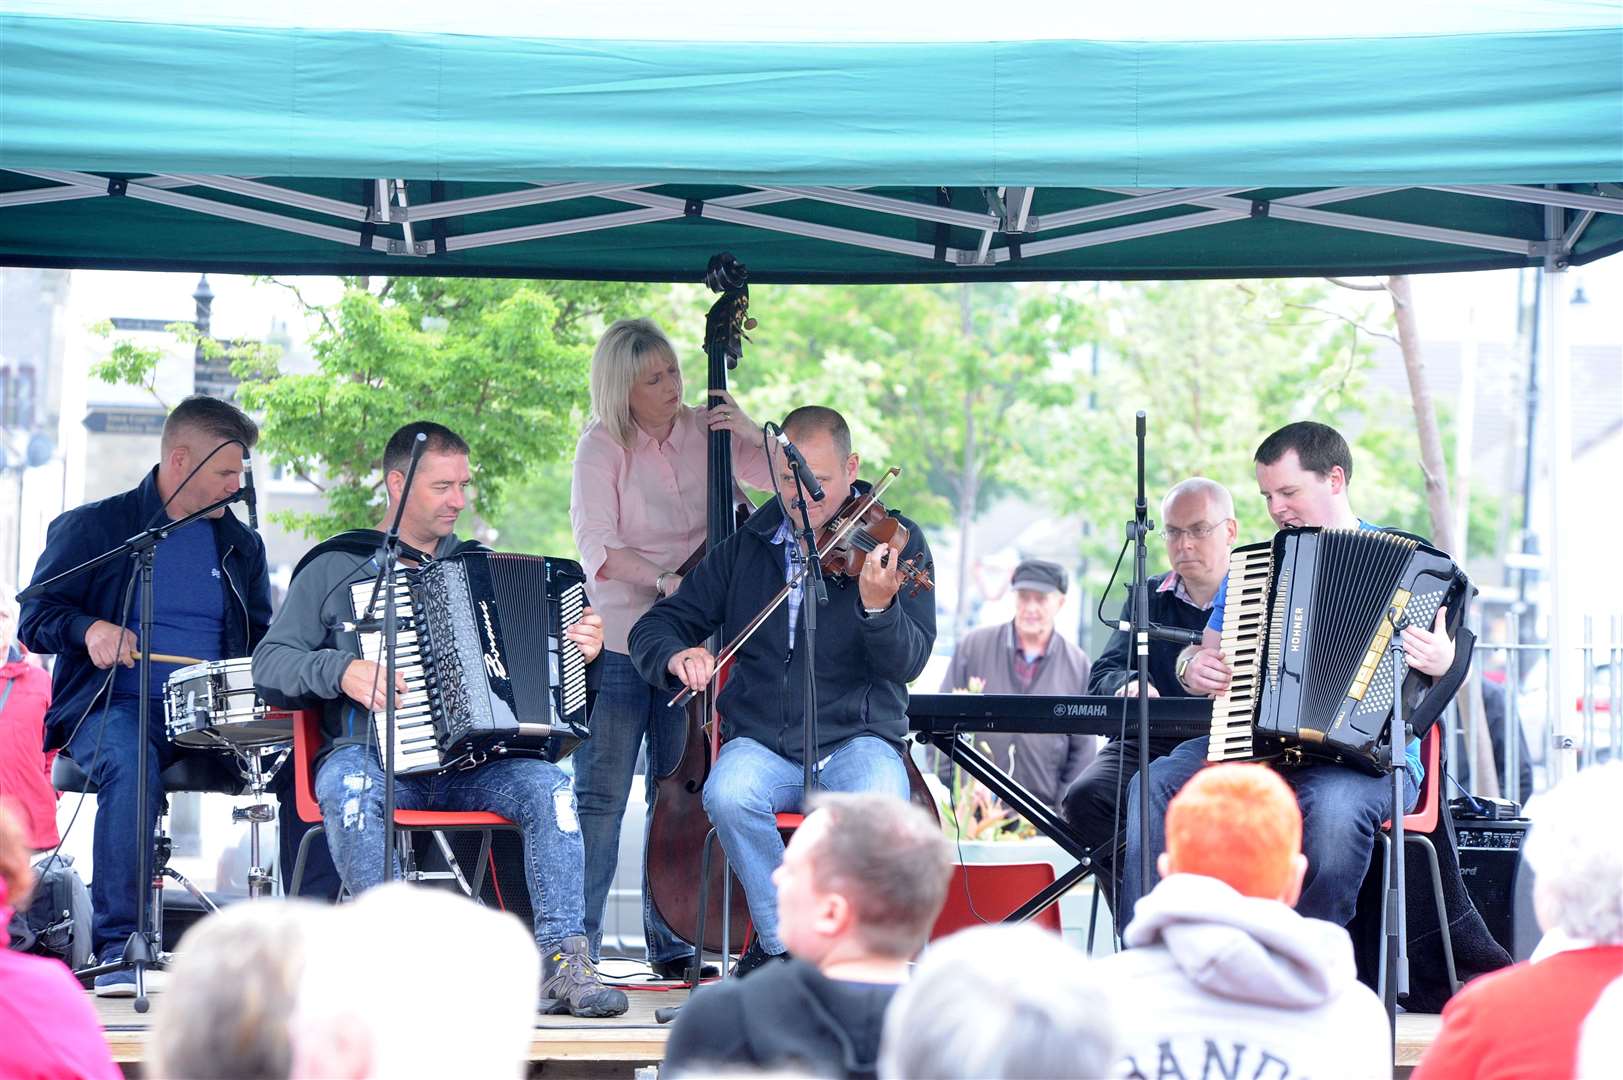 Picture: Eric Cormack. Image No.041335. KEITH MUSIC FESTIVAL. SCOTT BAND SCOTTISH COUNTRY DANCE BAND ENTARTAIN IN REIDHAVEN SQ..